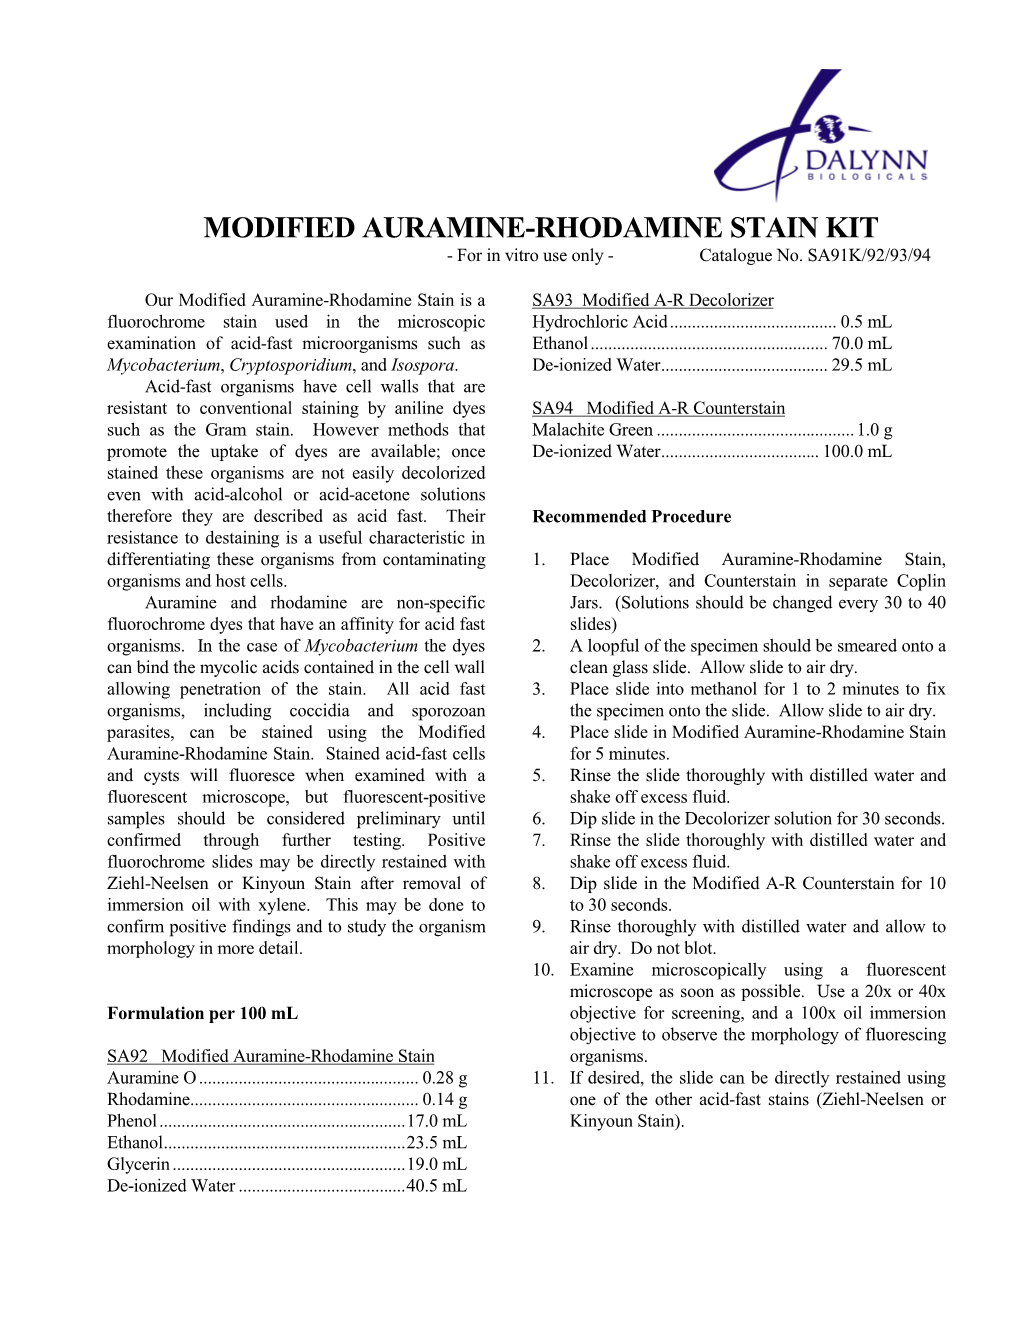 MODIFIED AURAMINE-RHODAMINE STAIN KIT - for in Vitro Use Only - Catalogue No